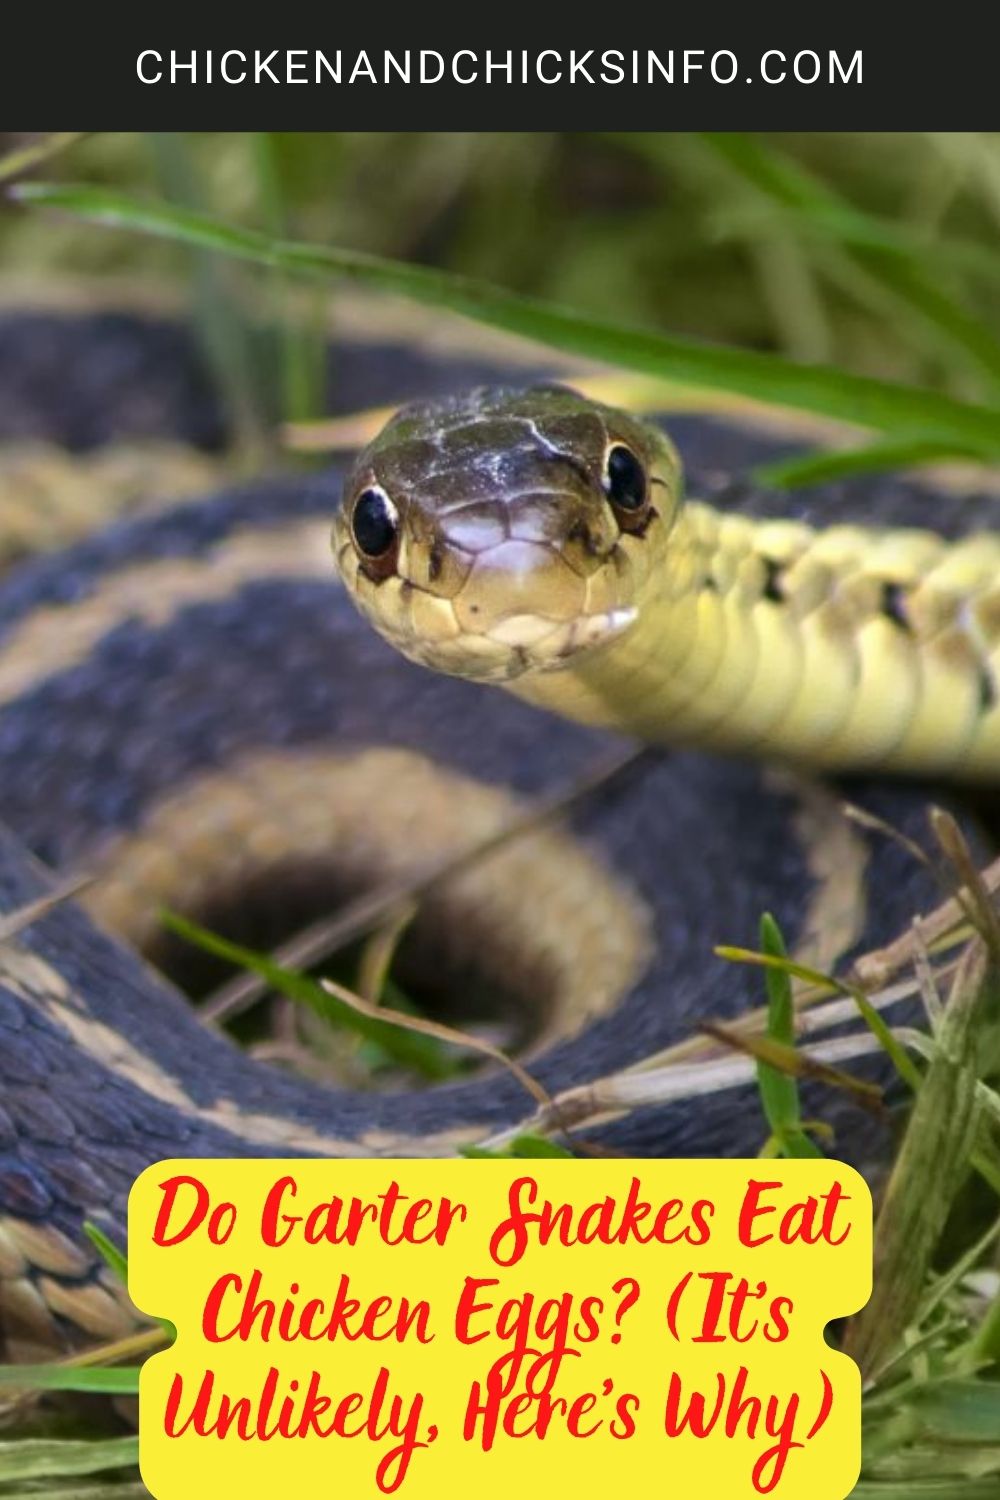 Do Garter Snakes Eat Chicken Eggs? (It’s Unlikely, Here’s Why) poster.
